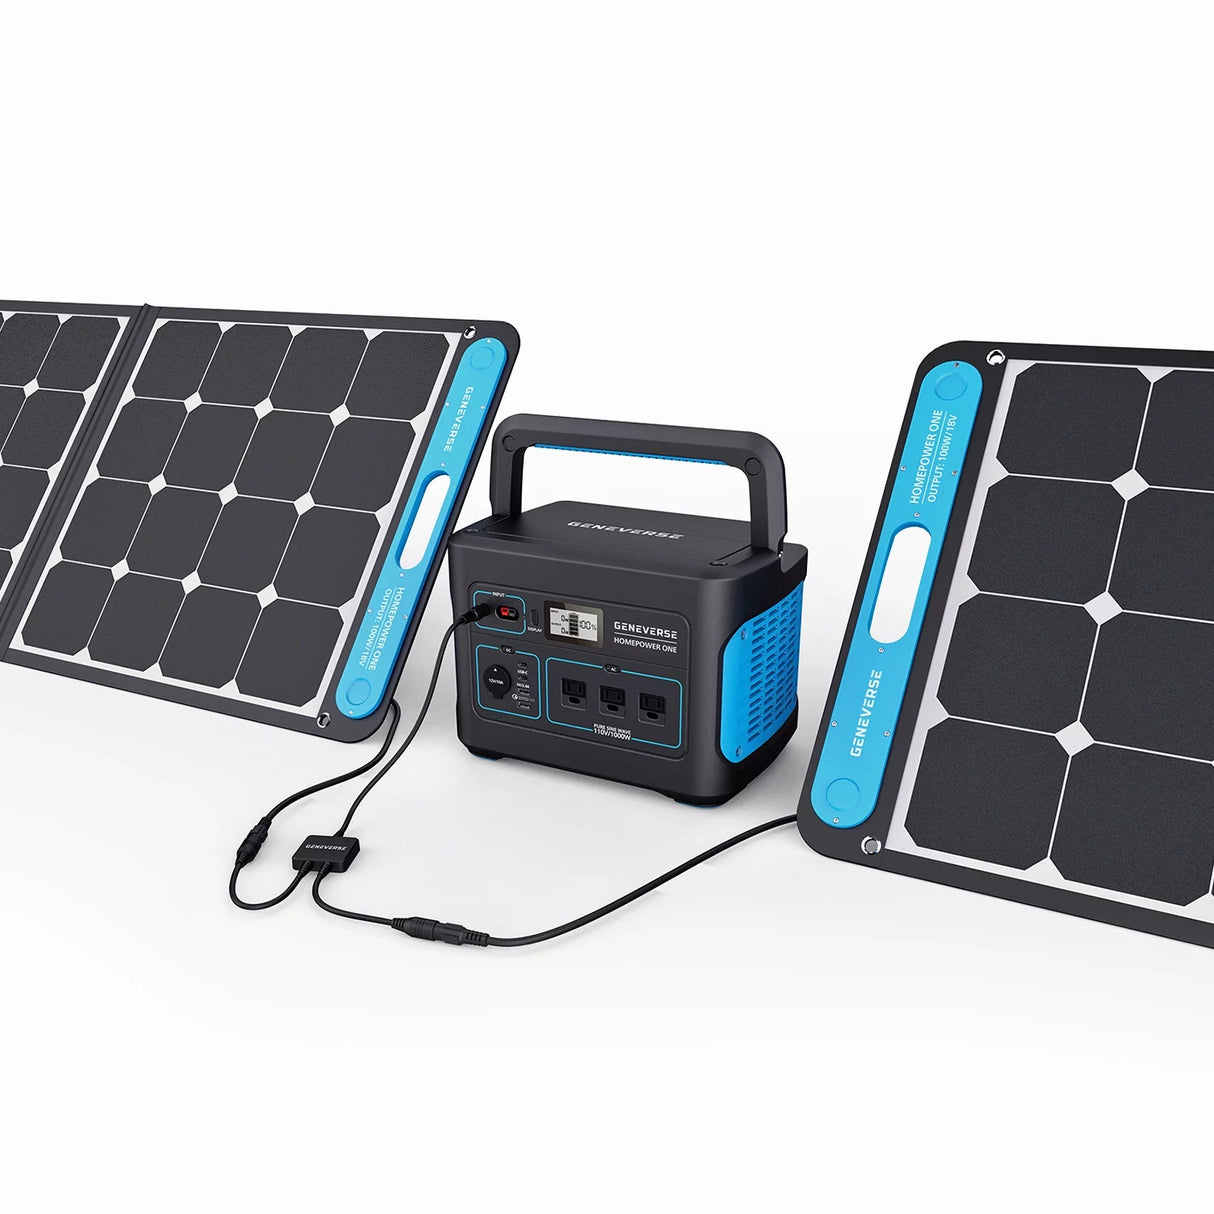 1002Wh 3X Homepower ONE (3X 1000W AC Outlets Each) + 6X 100W Solar Panels. Quiet, Indoor-Safe Backup Battery Generators for Home Devices